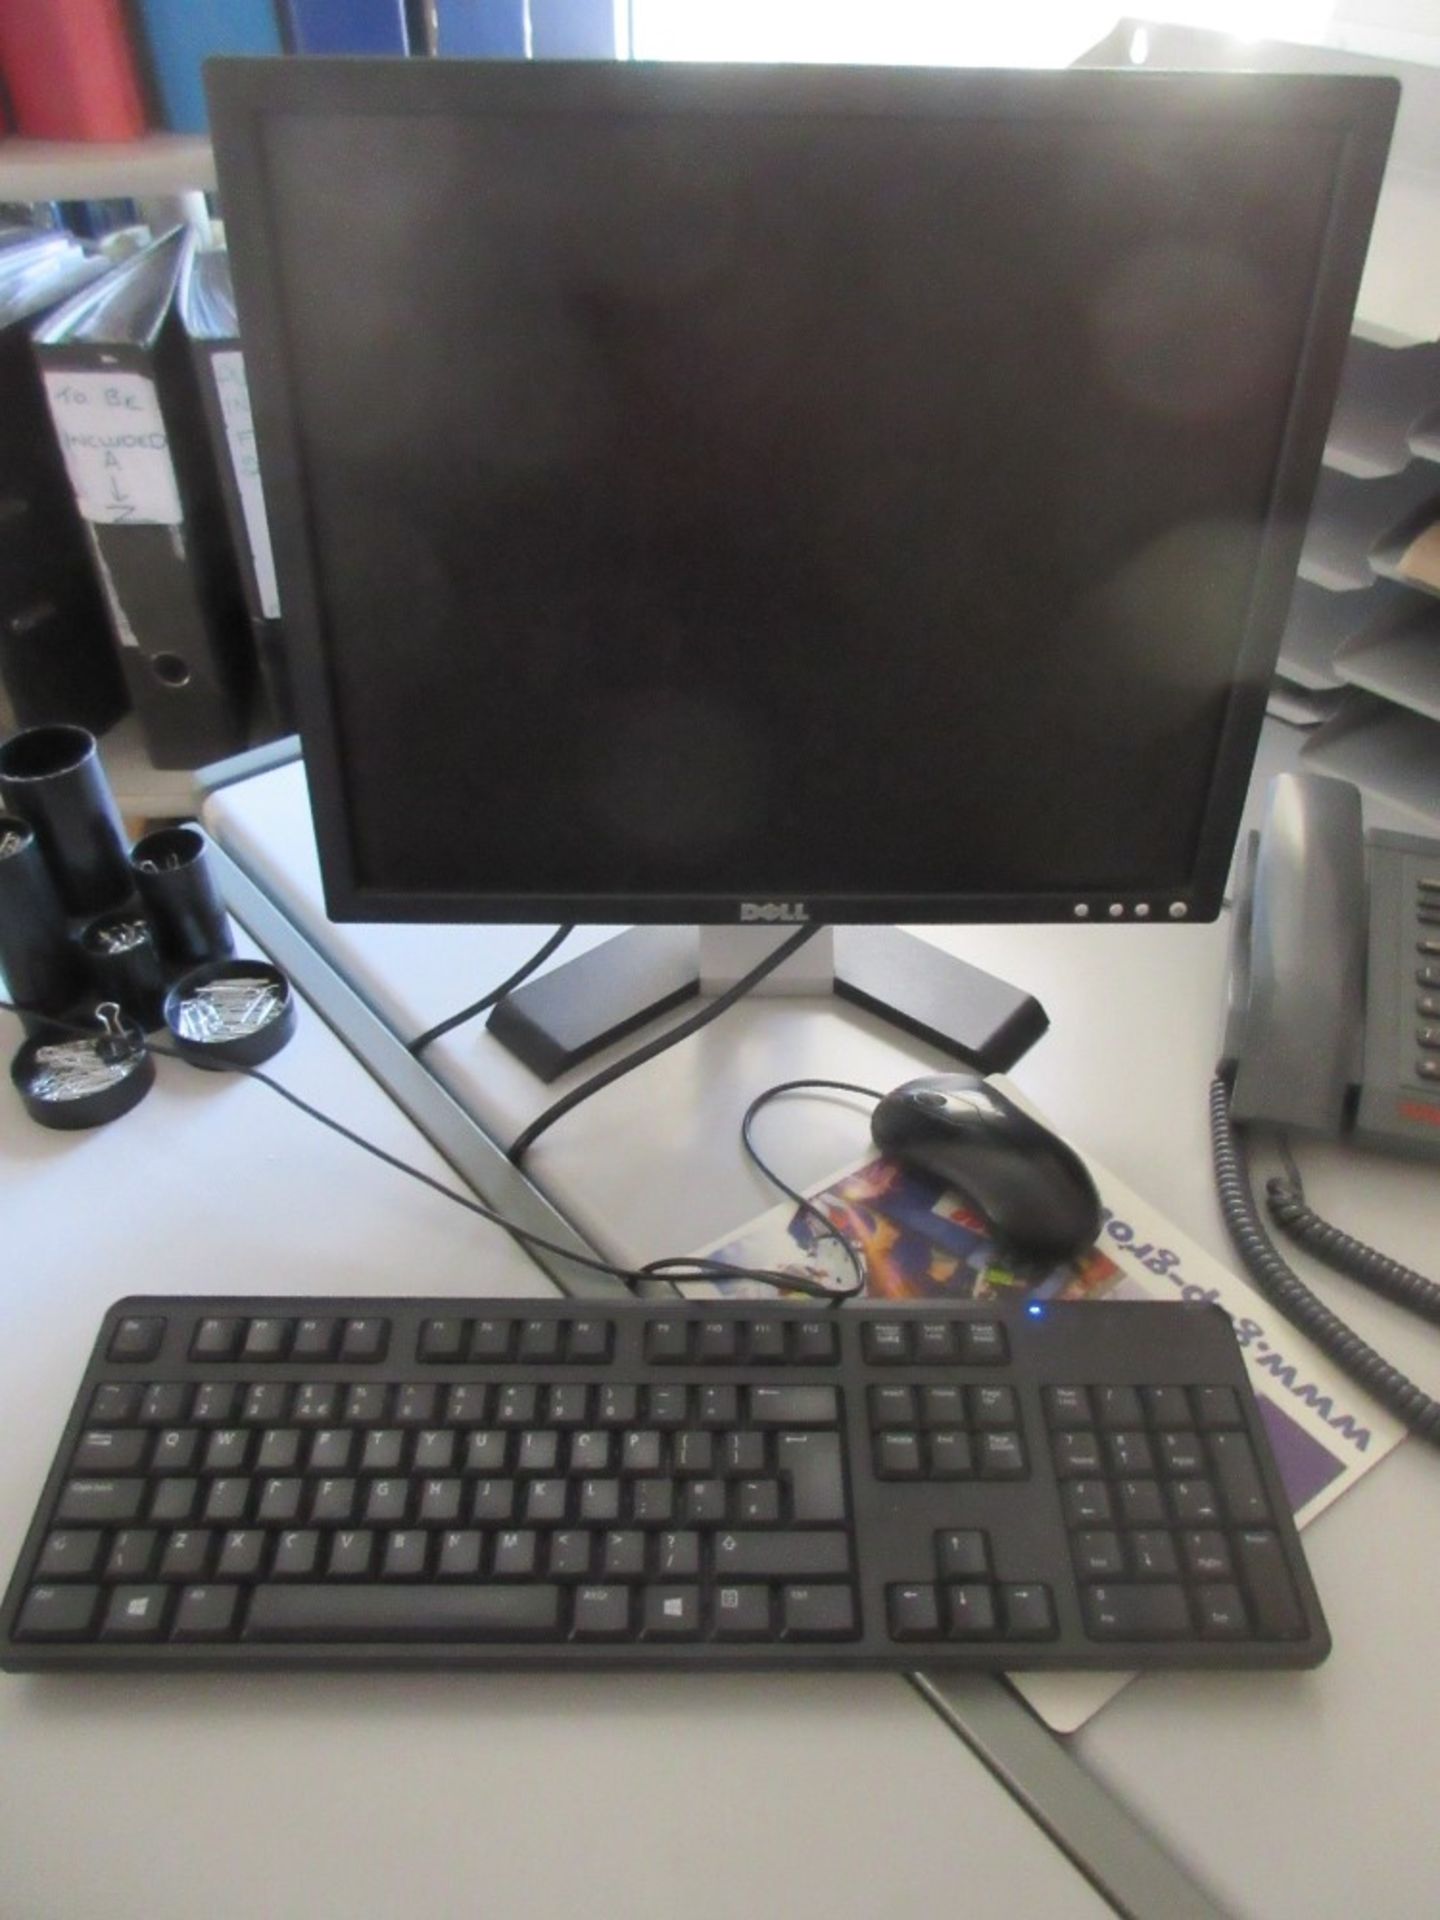 Dell Vostro 220 mini tower PC with flat screen monitor, keyboard and mouse incorporating Core 2 duo - Image 2 of 2